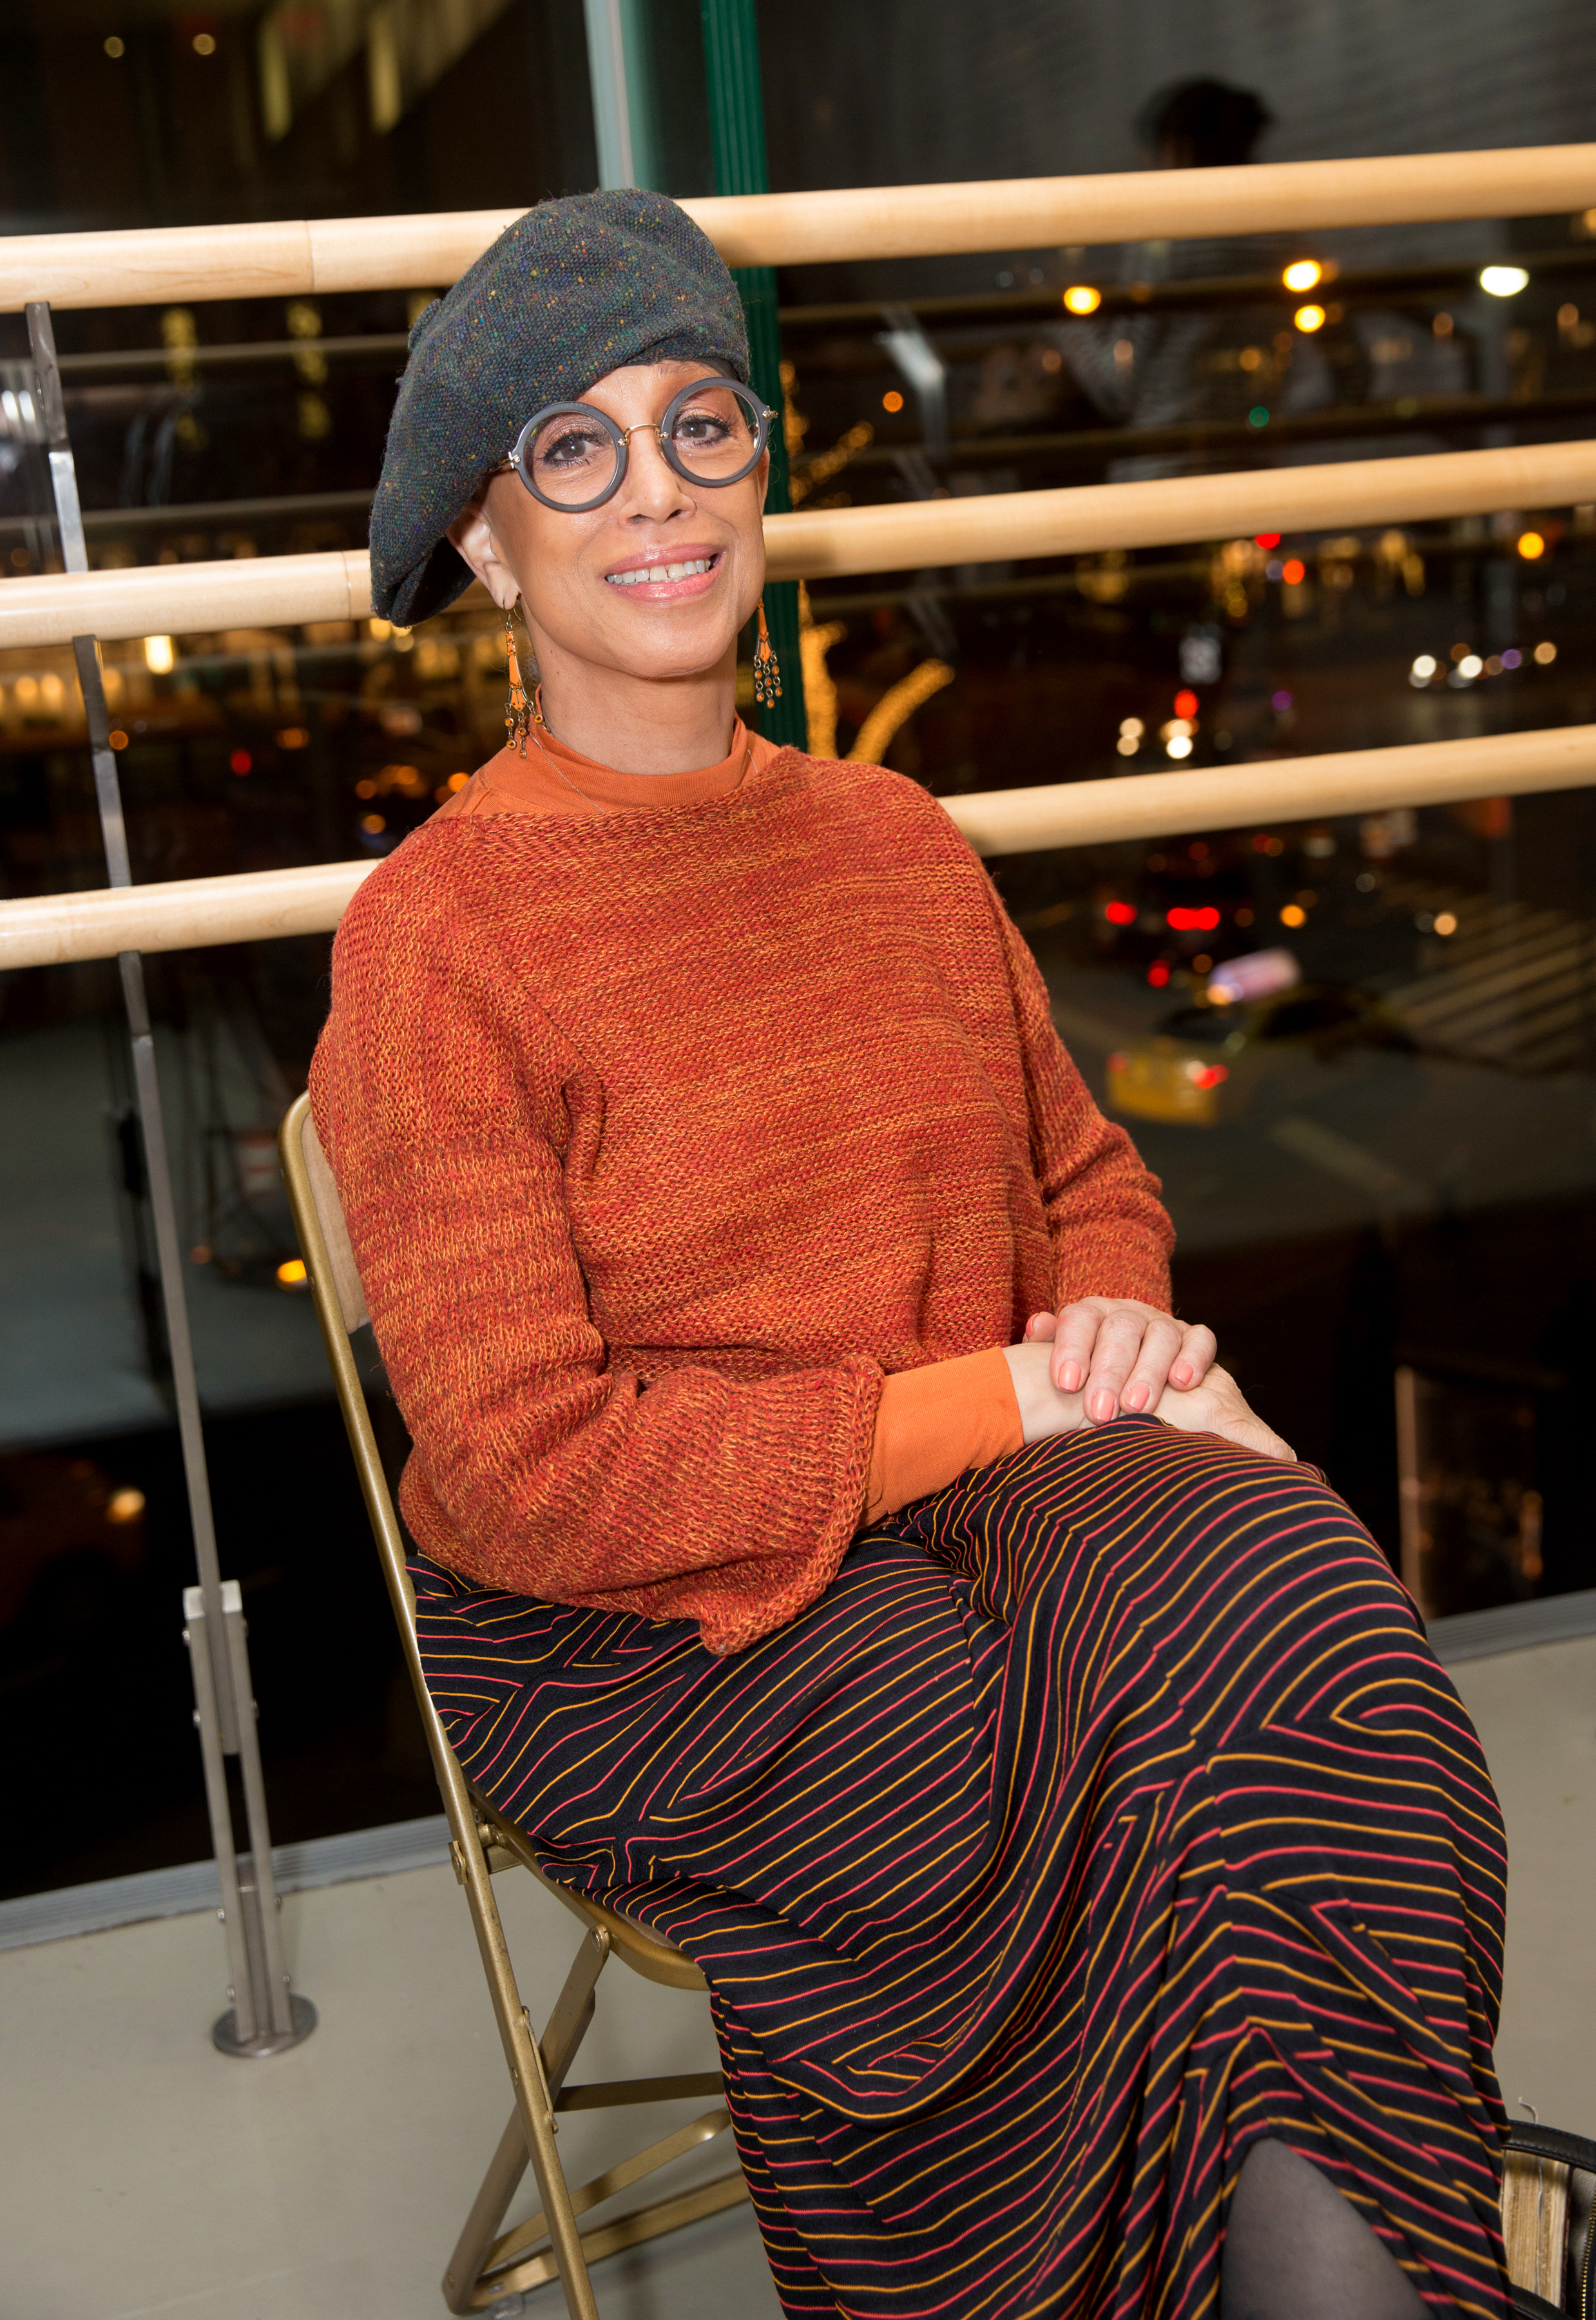 The image features a woman seated on a metal folding chair, smiling towards the camera. She's stylishly attired in a rust-colored knitted sweater and a beret, with large circular earrings complementing her look. Her outfit is completed with boldly patterned pants that include stripes and swirls in contrasting colors. 